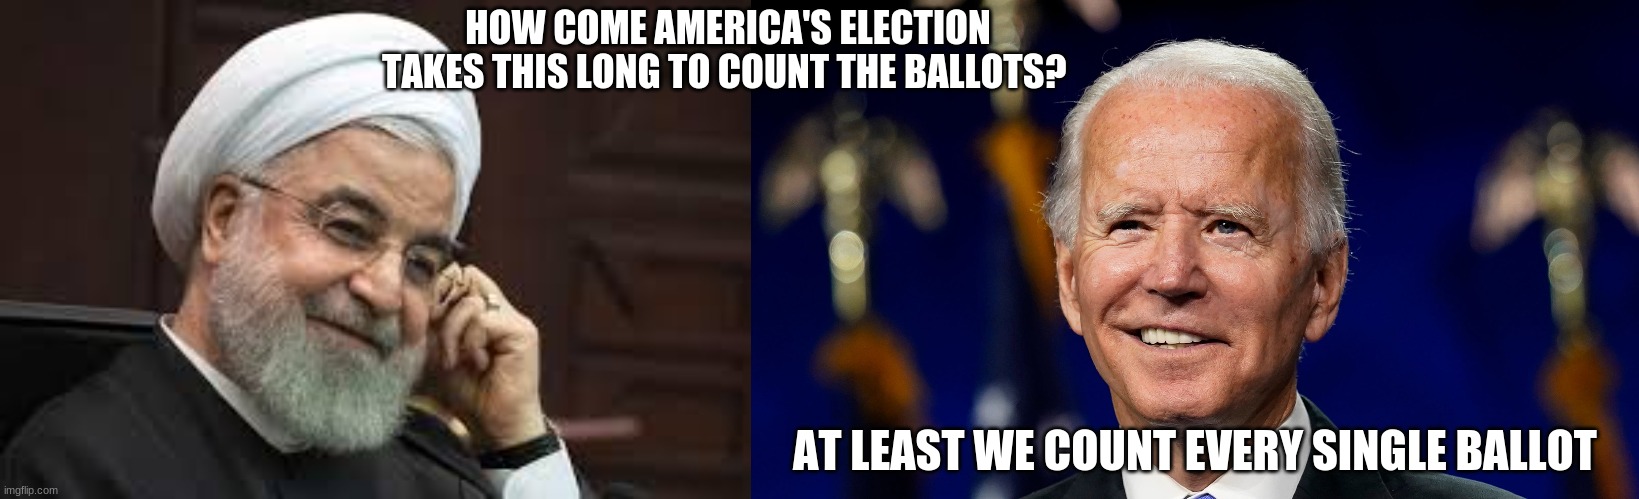 Election | HOW COME AMERICA'S ELECTION TAKES THIS LONG TO COUNT THE BALLOTS? AT LEAST WE COUNT EVERY SINGLE BALLOT | image tagged in election 2020 | made w/ Imgflip meme maker